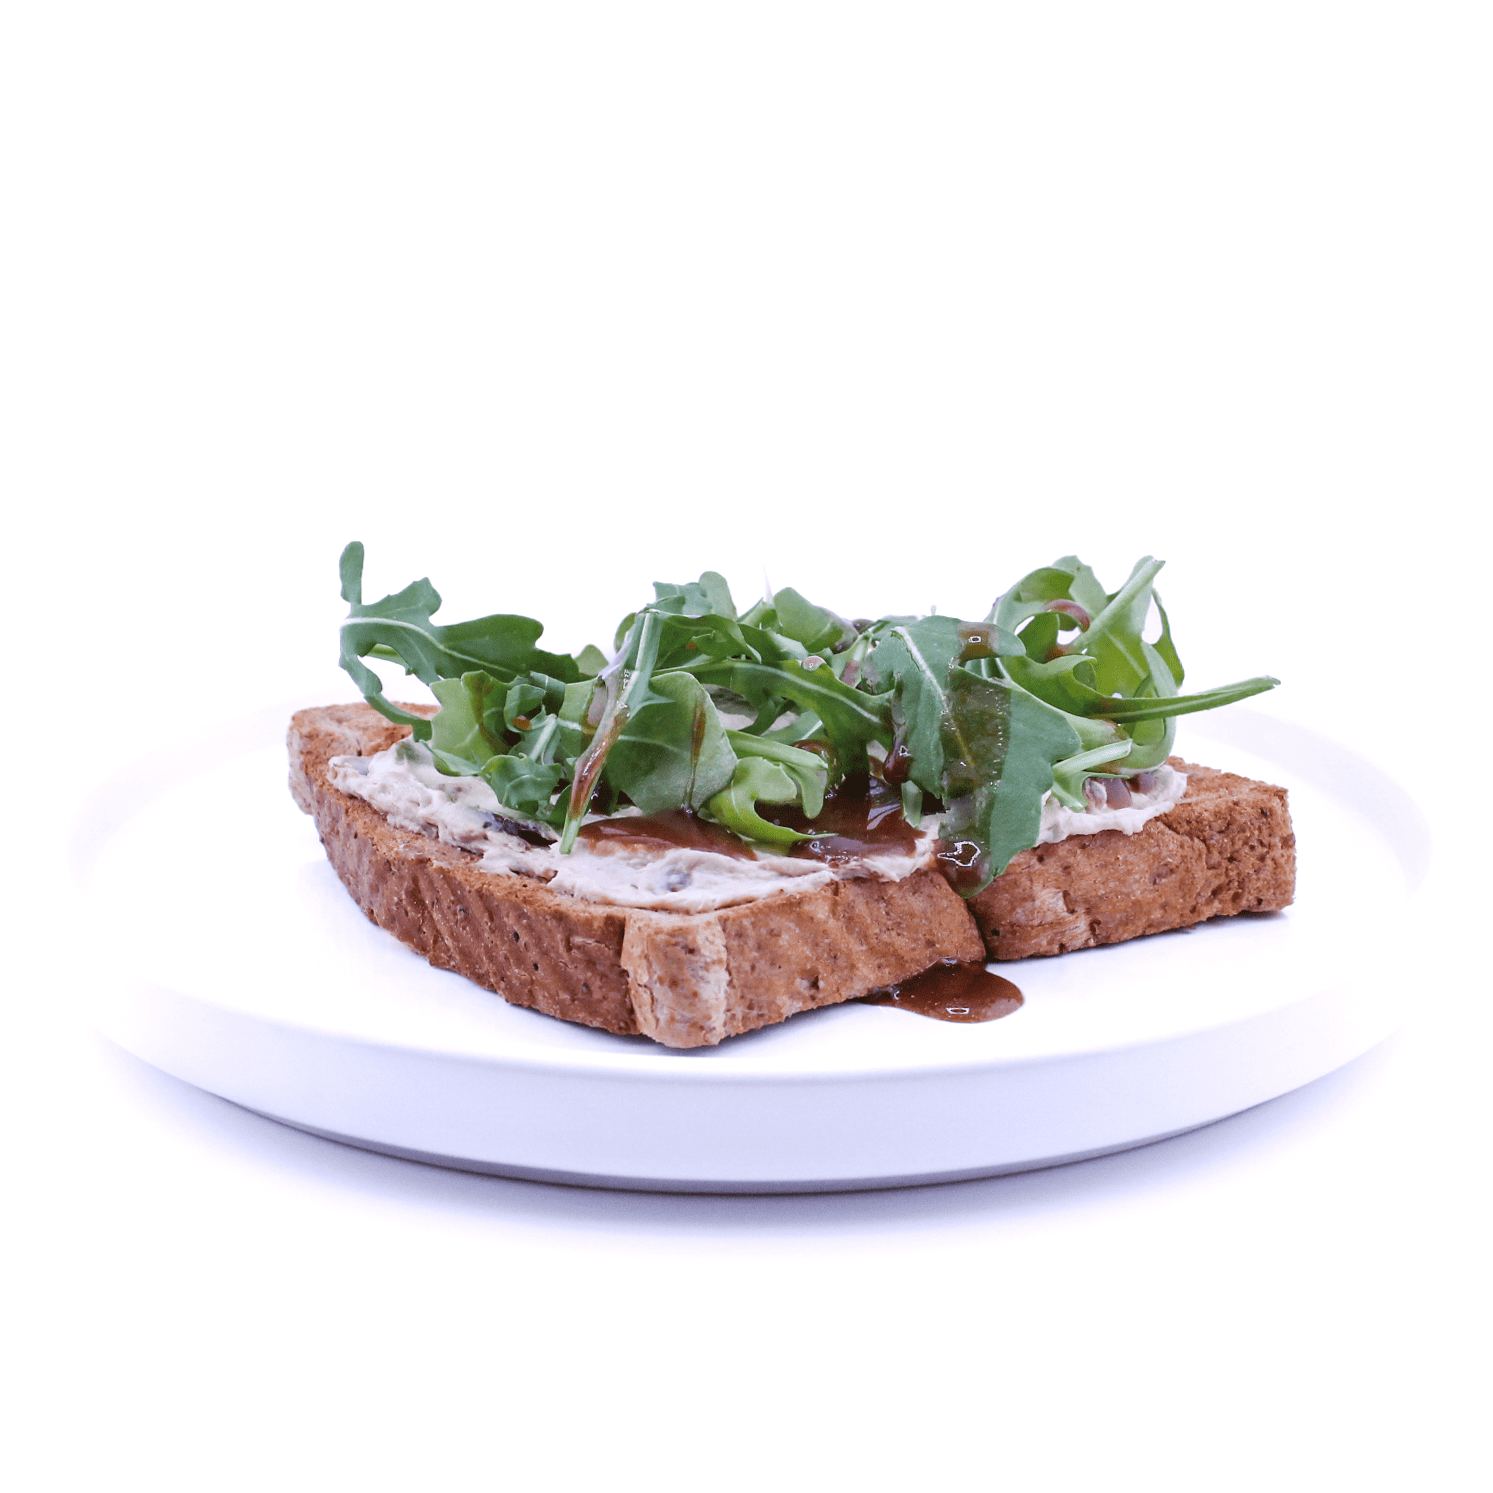 French Onion - French onion cream cheese, arugula, dressed with balsamic vinaigrette on toasted honey wheat - Vegetarian